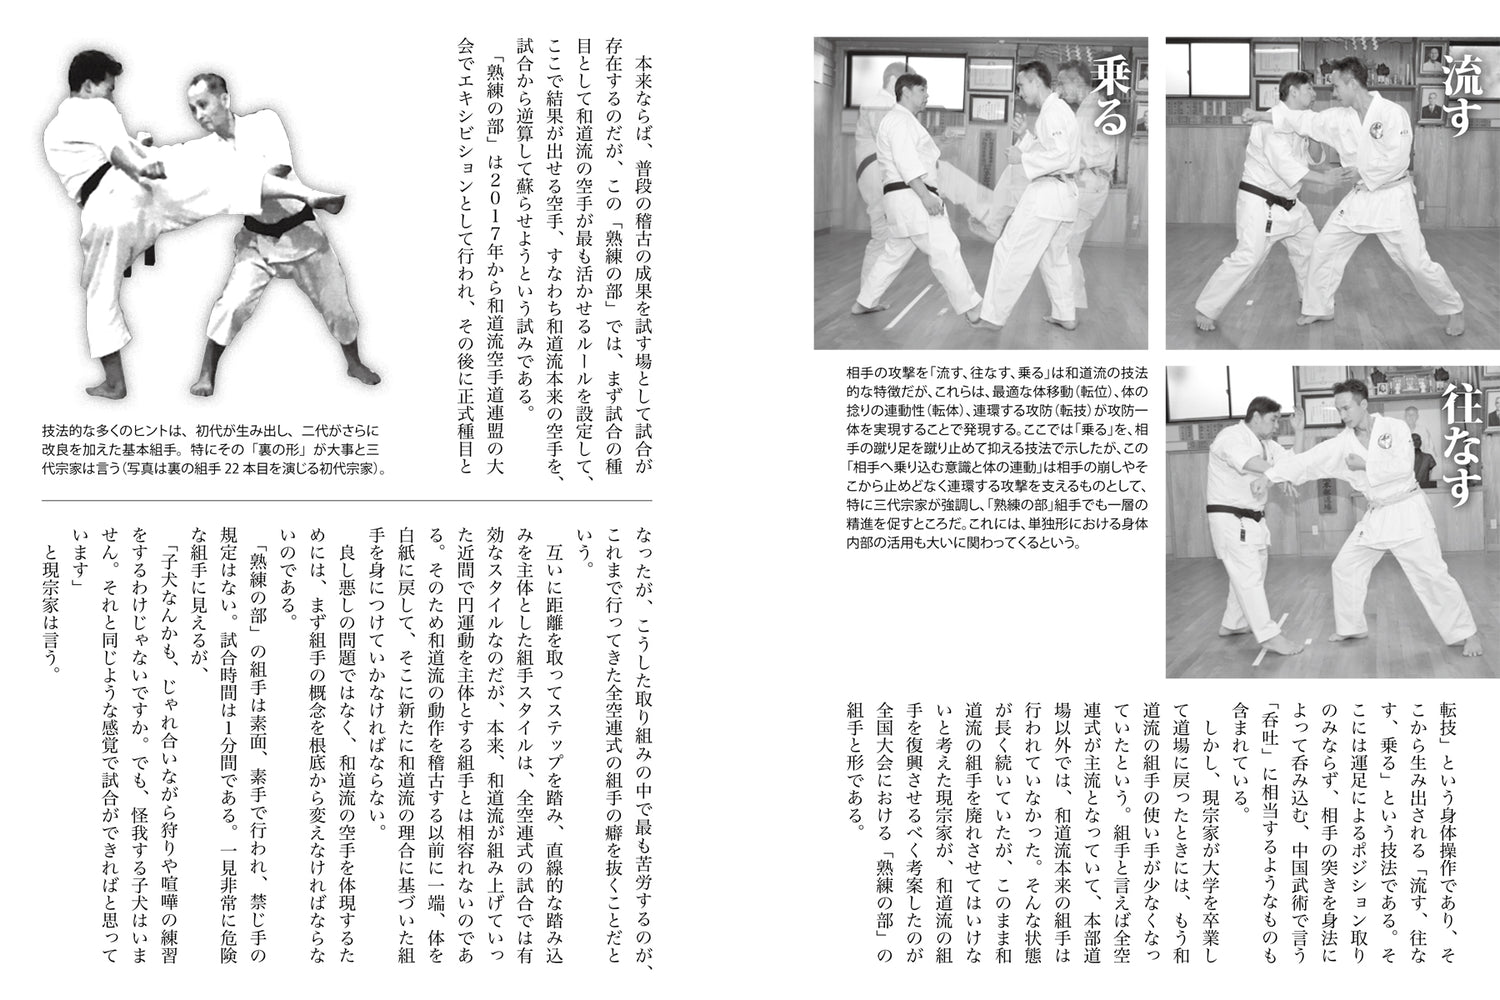 The Essence of the Four Major Karate Schools Book